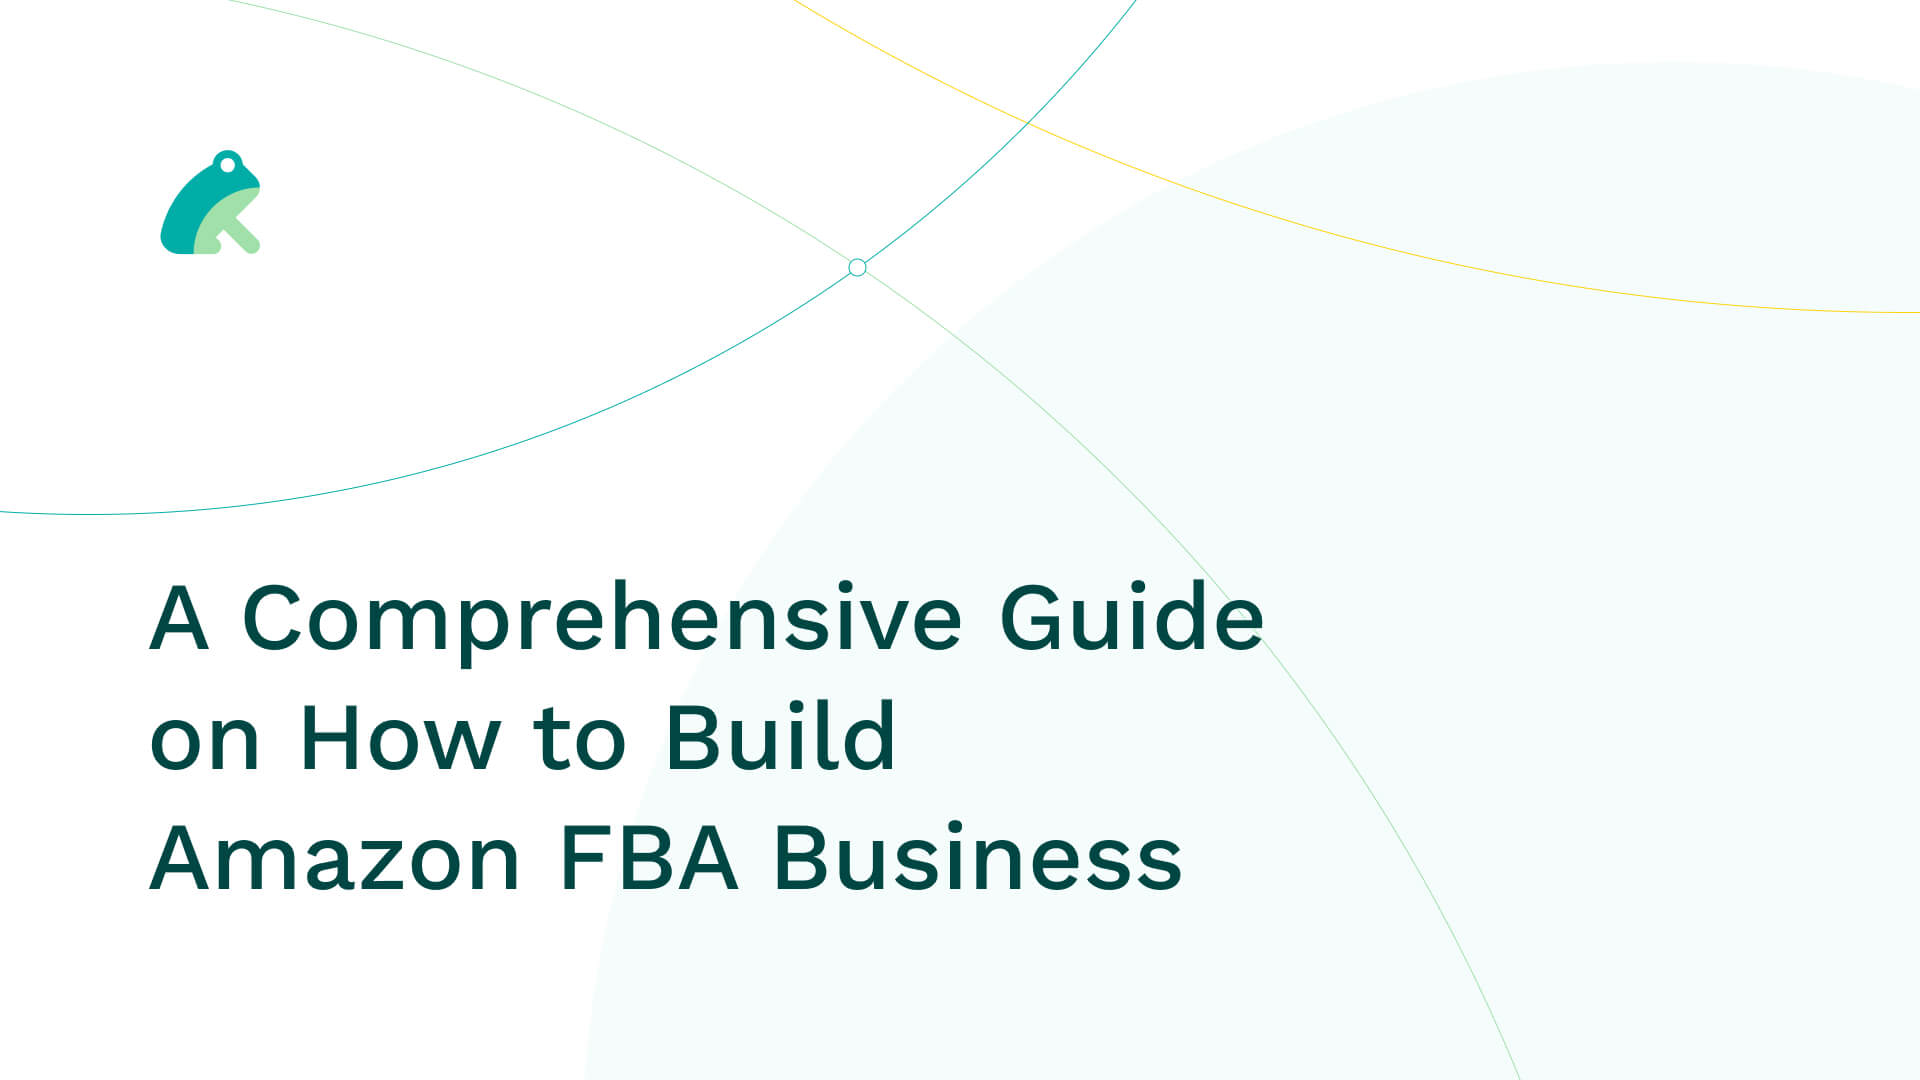 A Comprehensive Guide on How to Build Amazon FBA Business